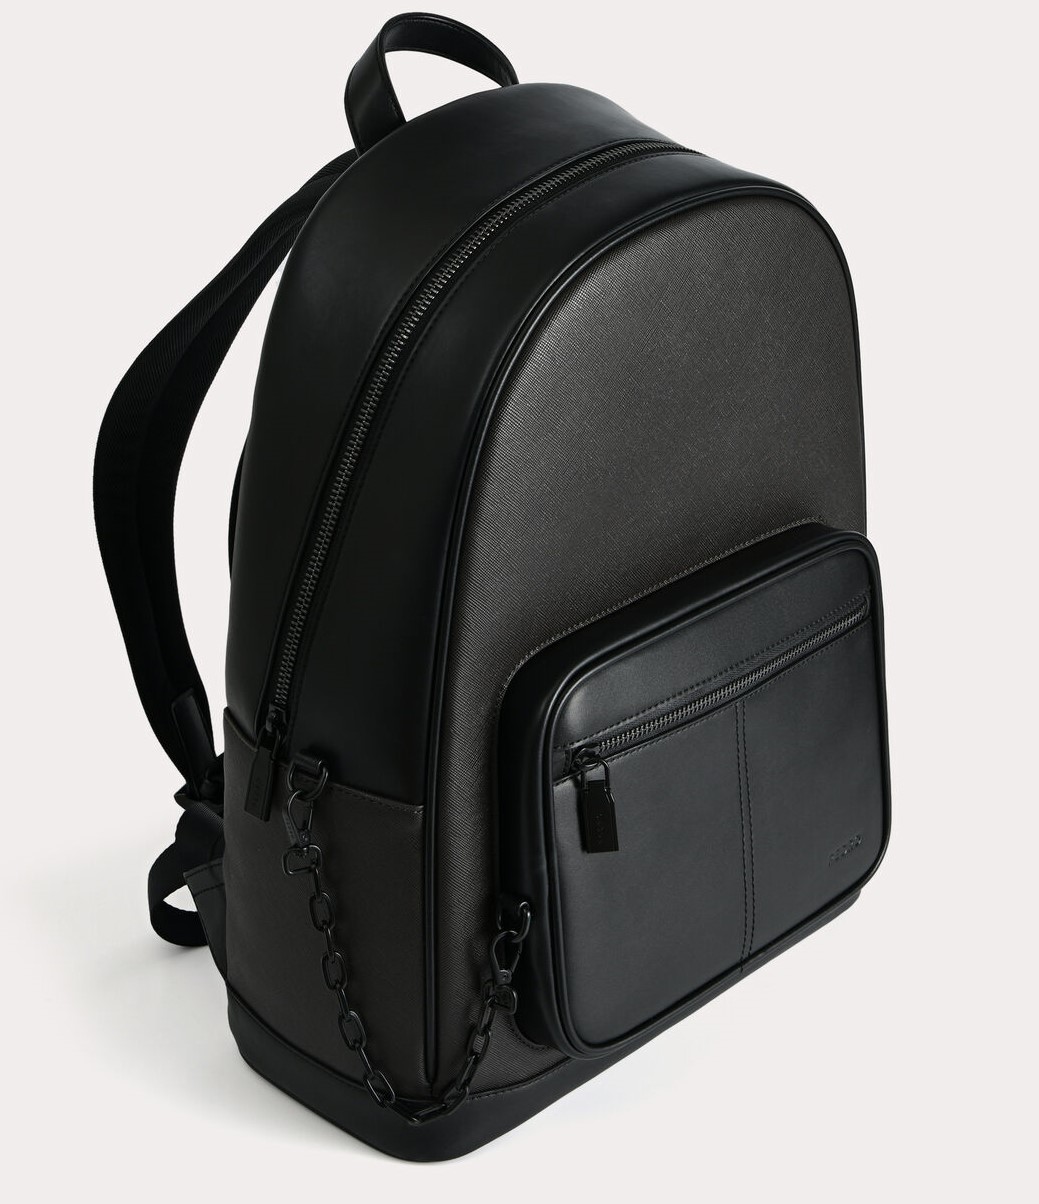 BALO NAM PEDRO STRUCTURED CHAIN BACKPACK 3